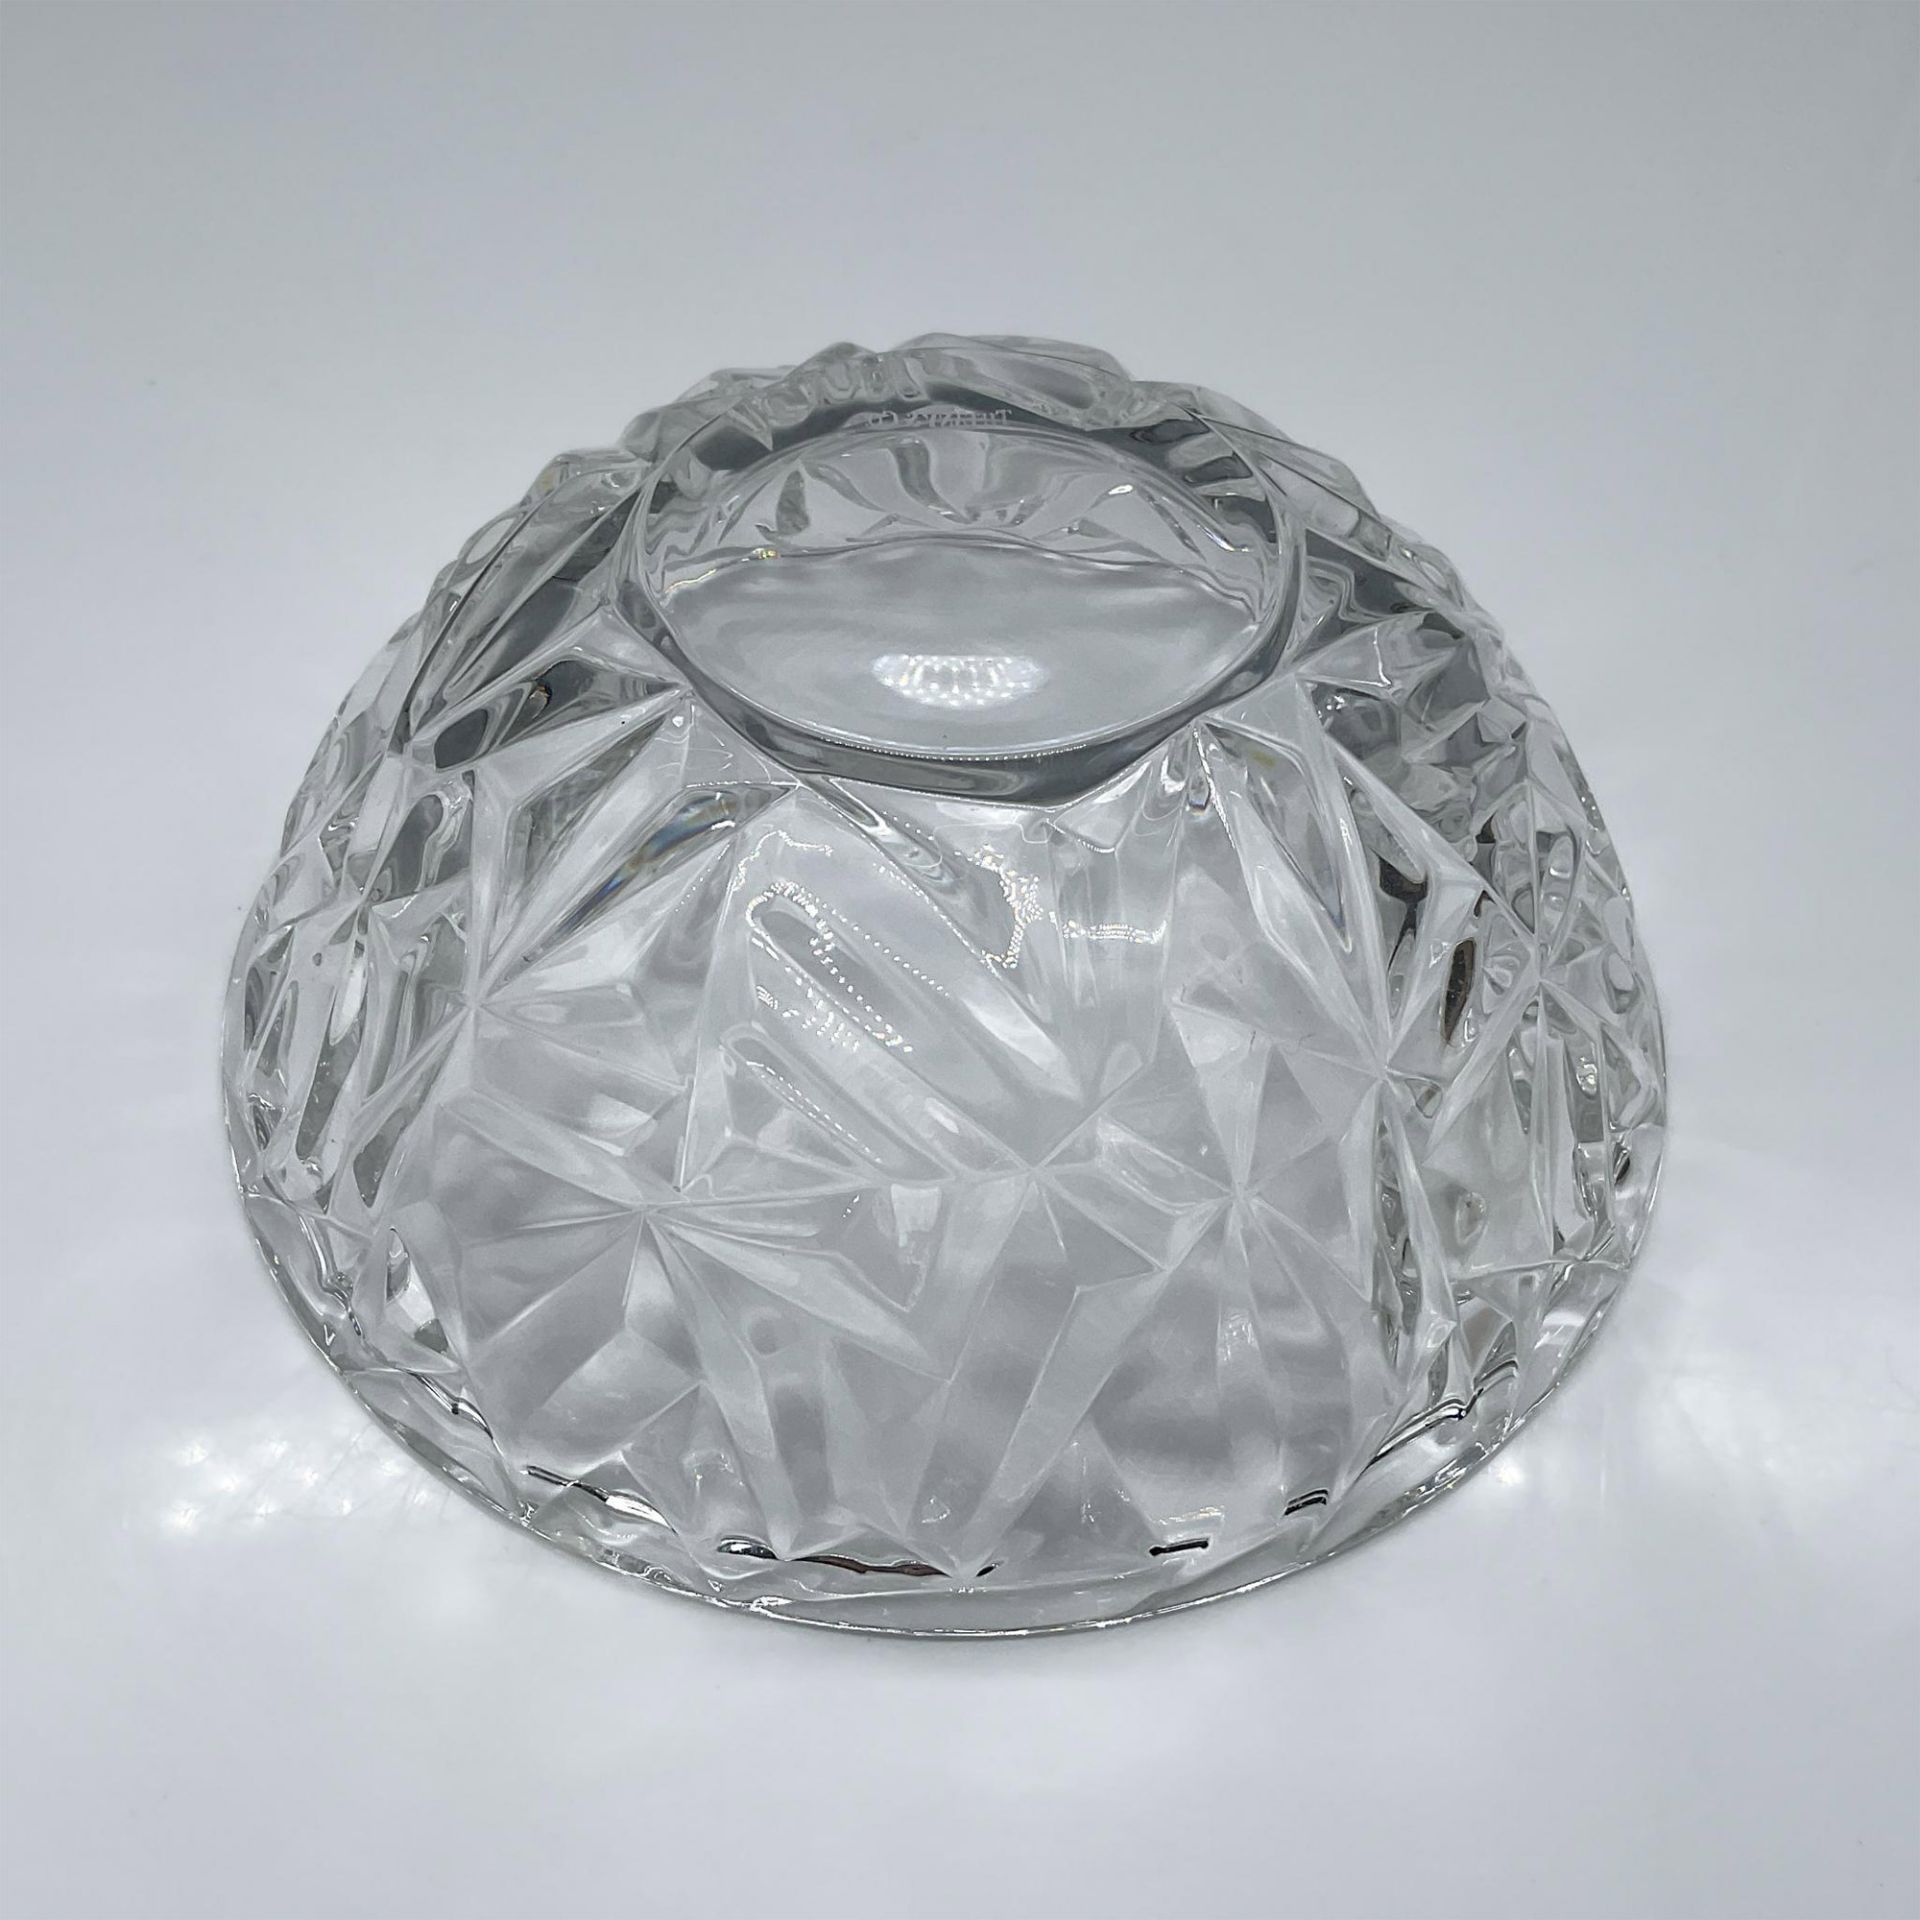 Tiffany and Co, Rock Cut Crystal Bowl - Image 3 of 4